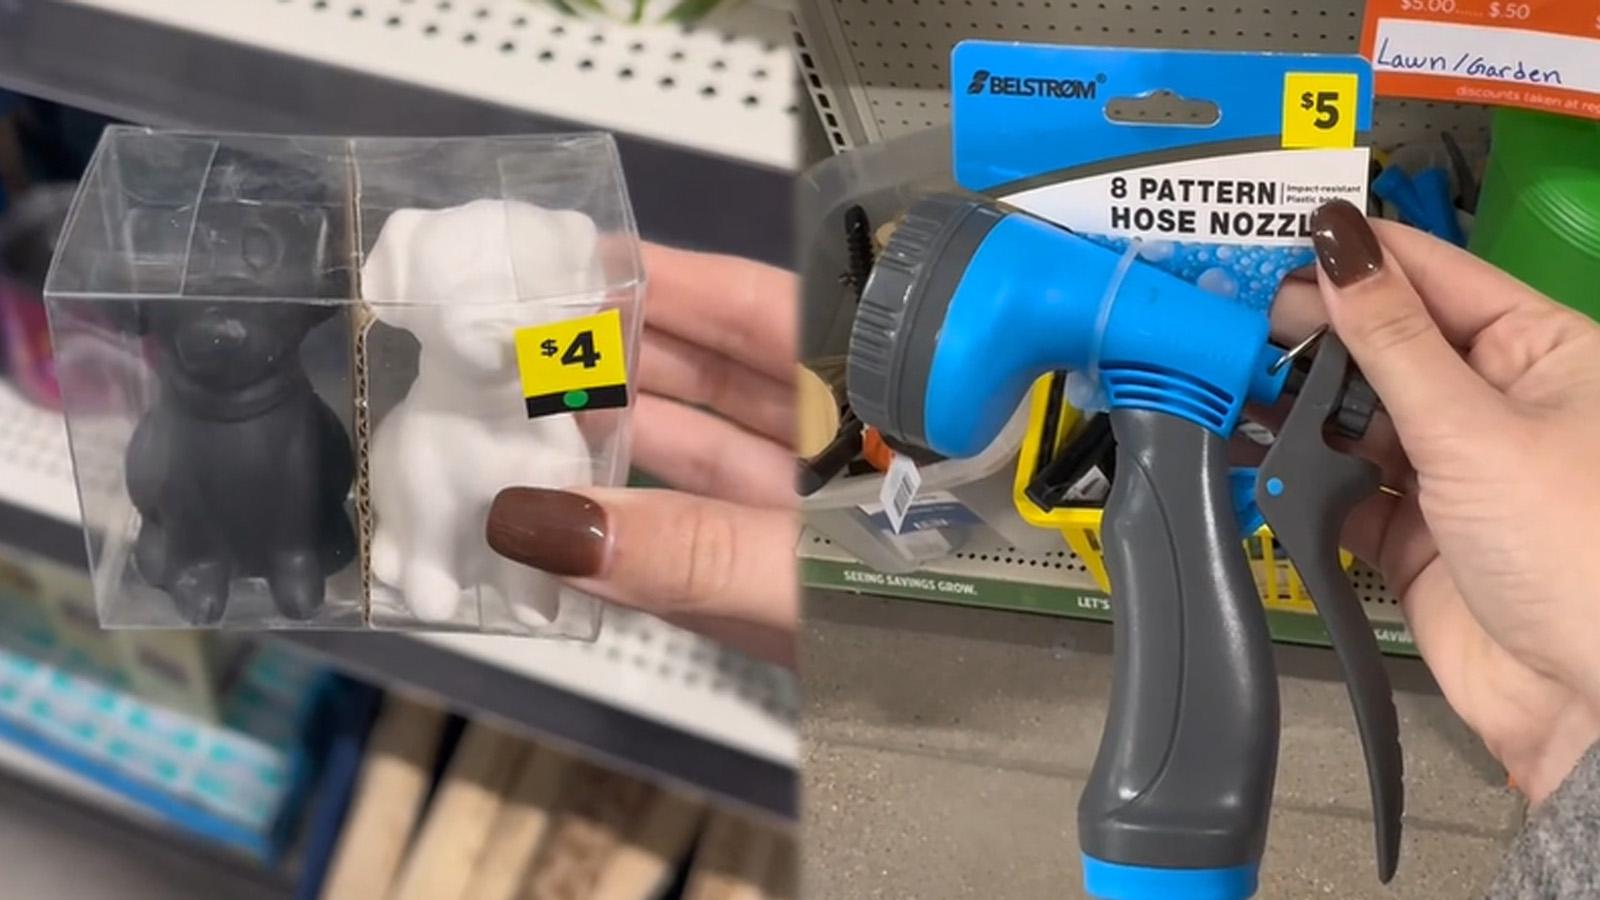 Dollar General is selling items for just one penny but there's a catch -  Dexerto